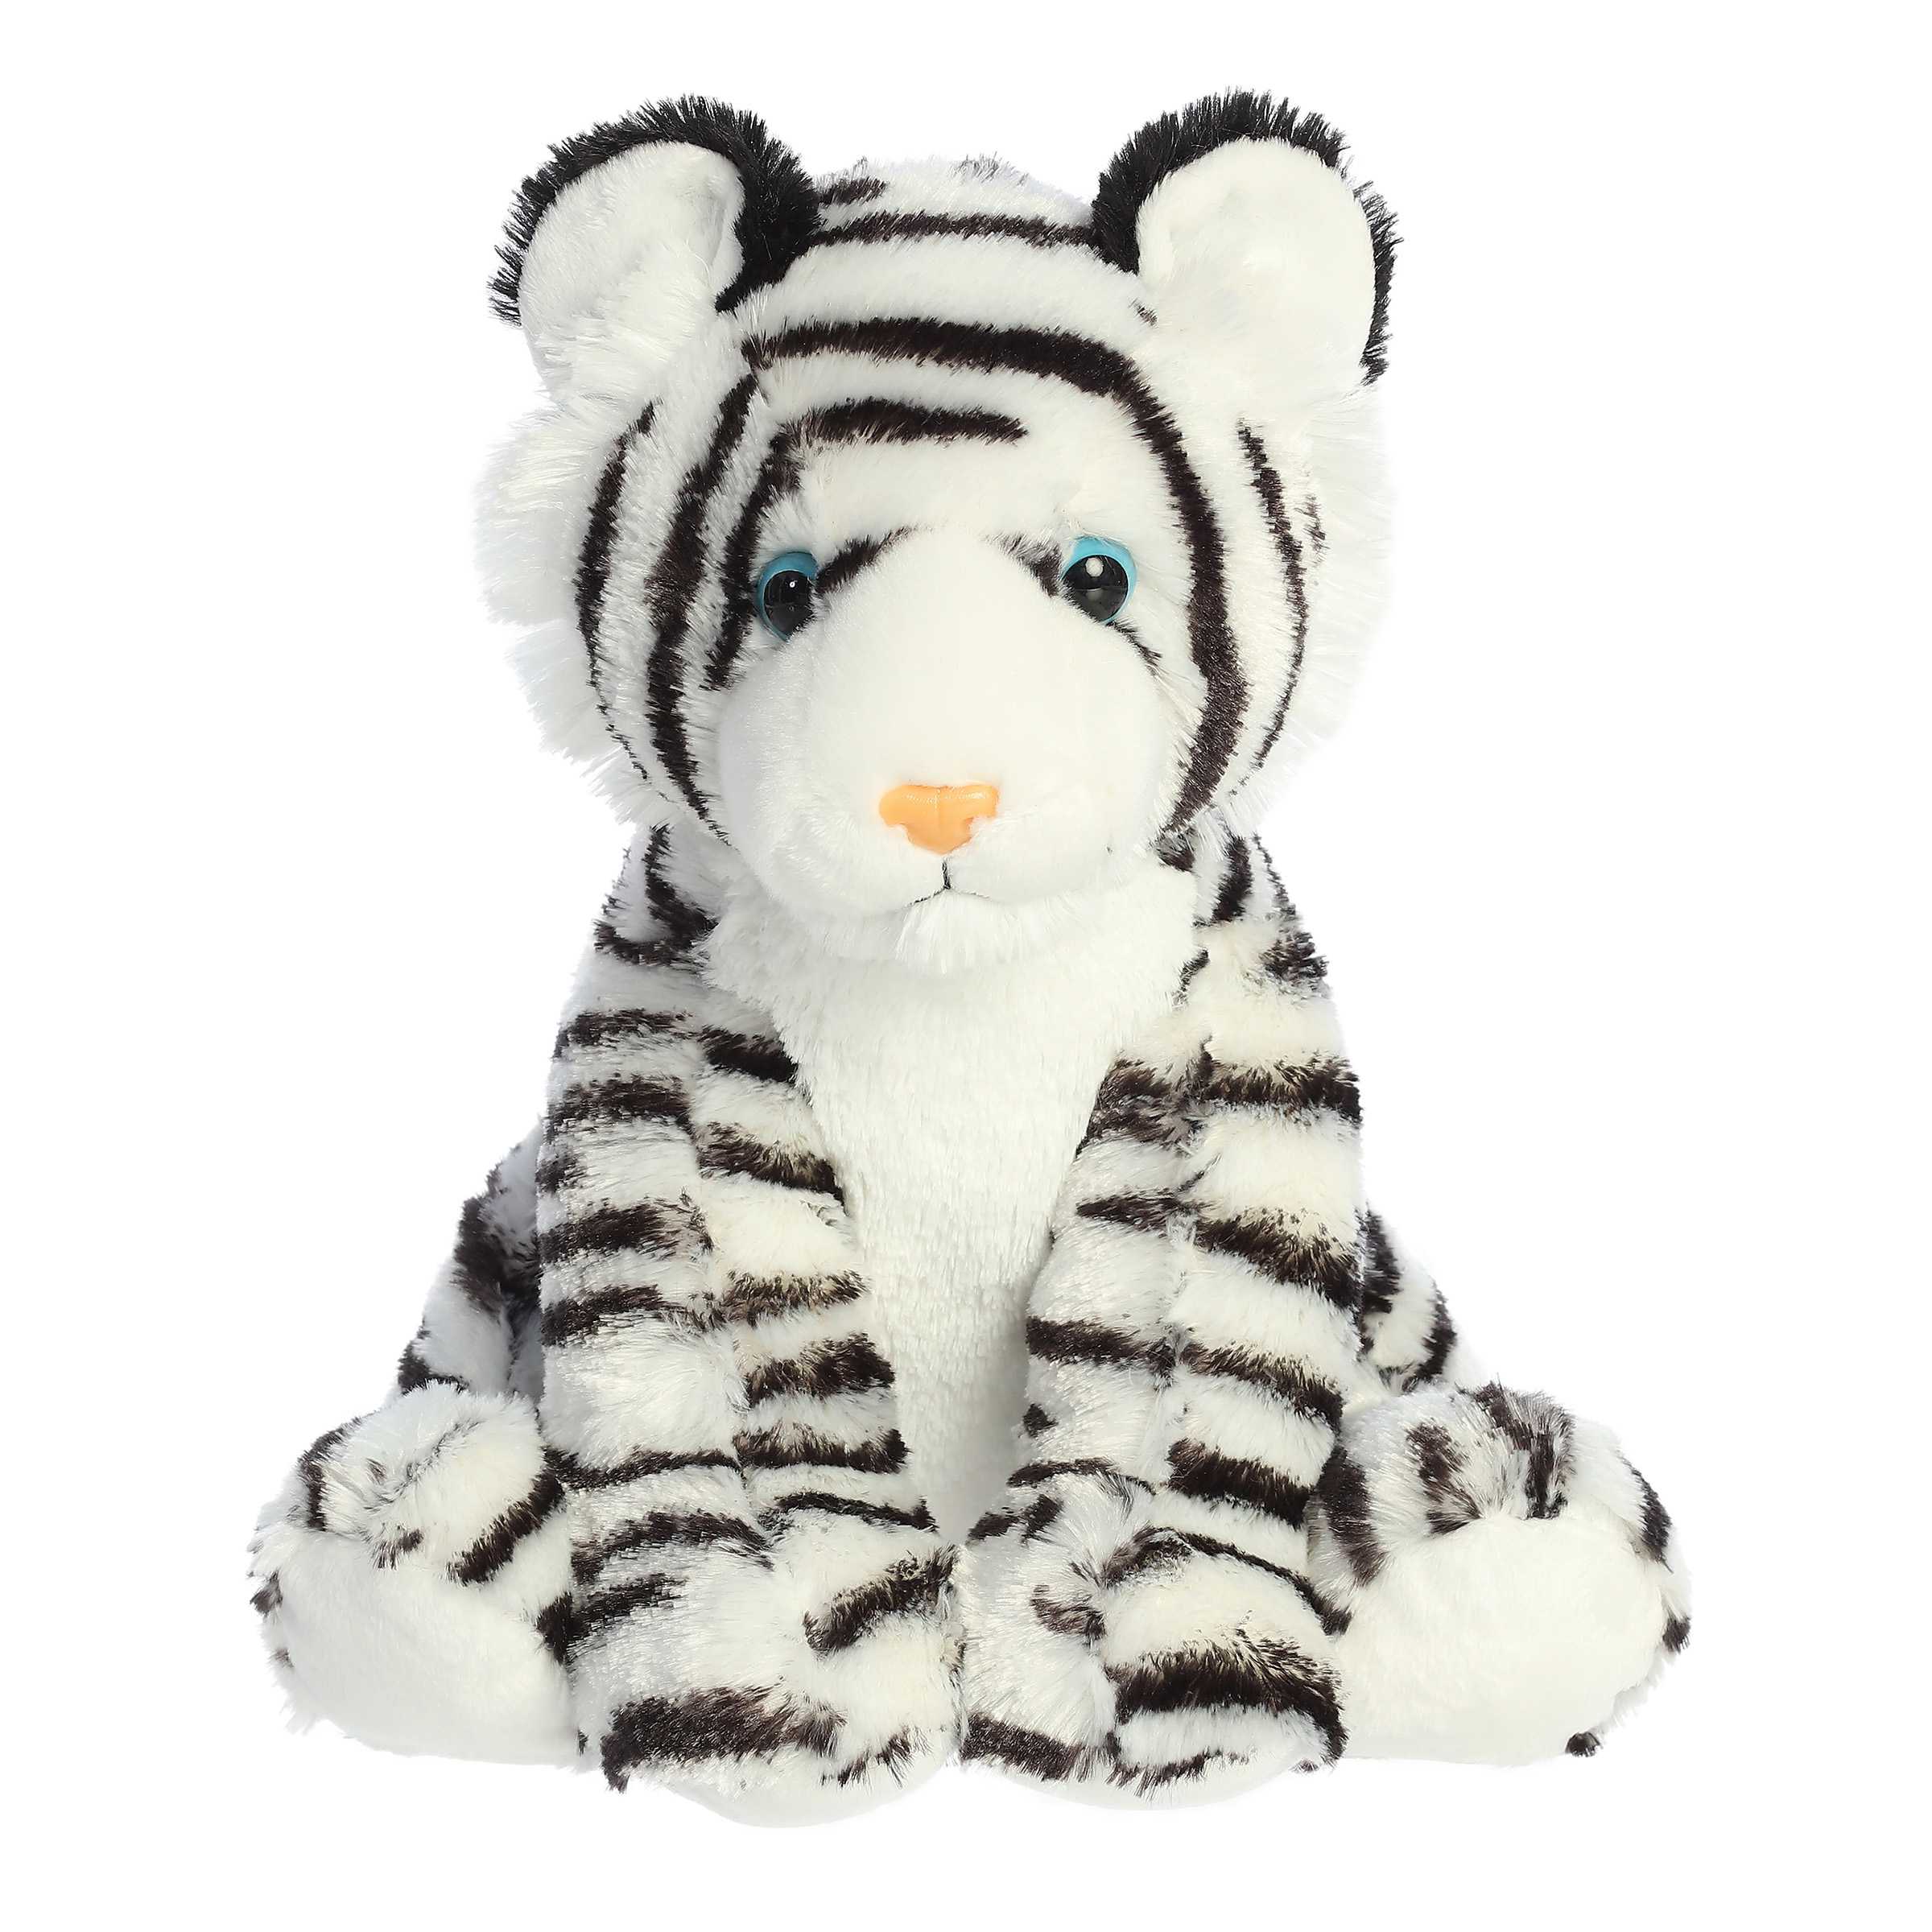 Aurora White Tiger Plush by Aurora stuffed animals with blue eyes and black and white stripes.